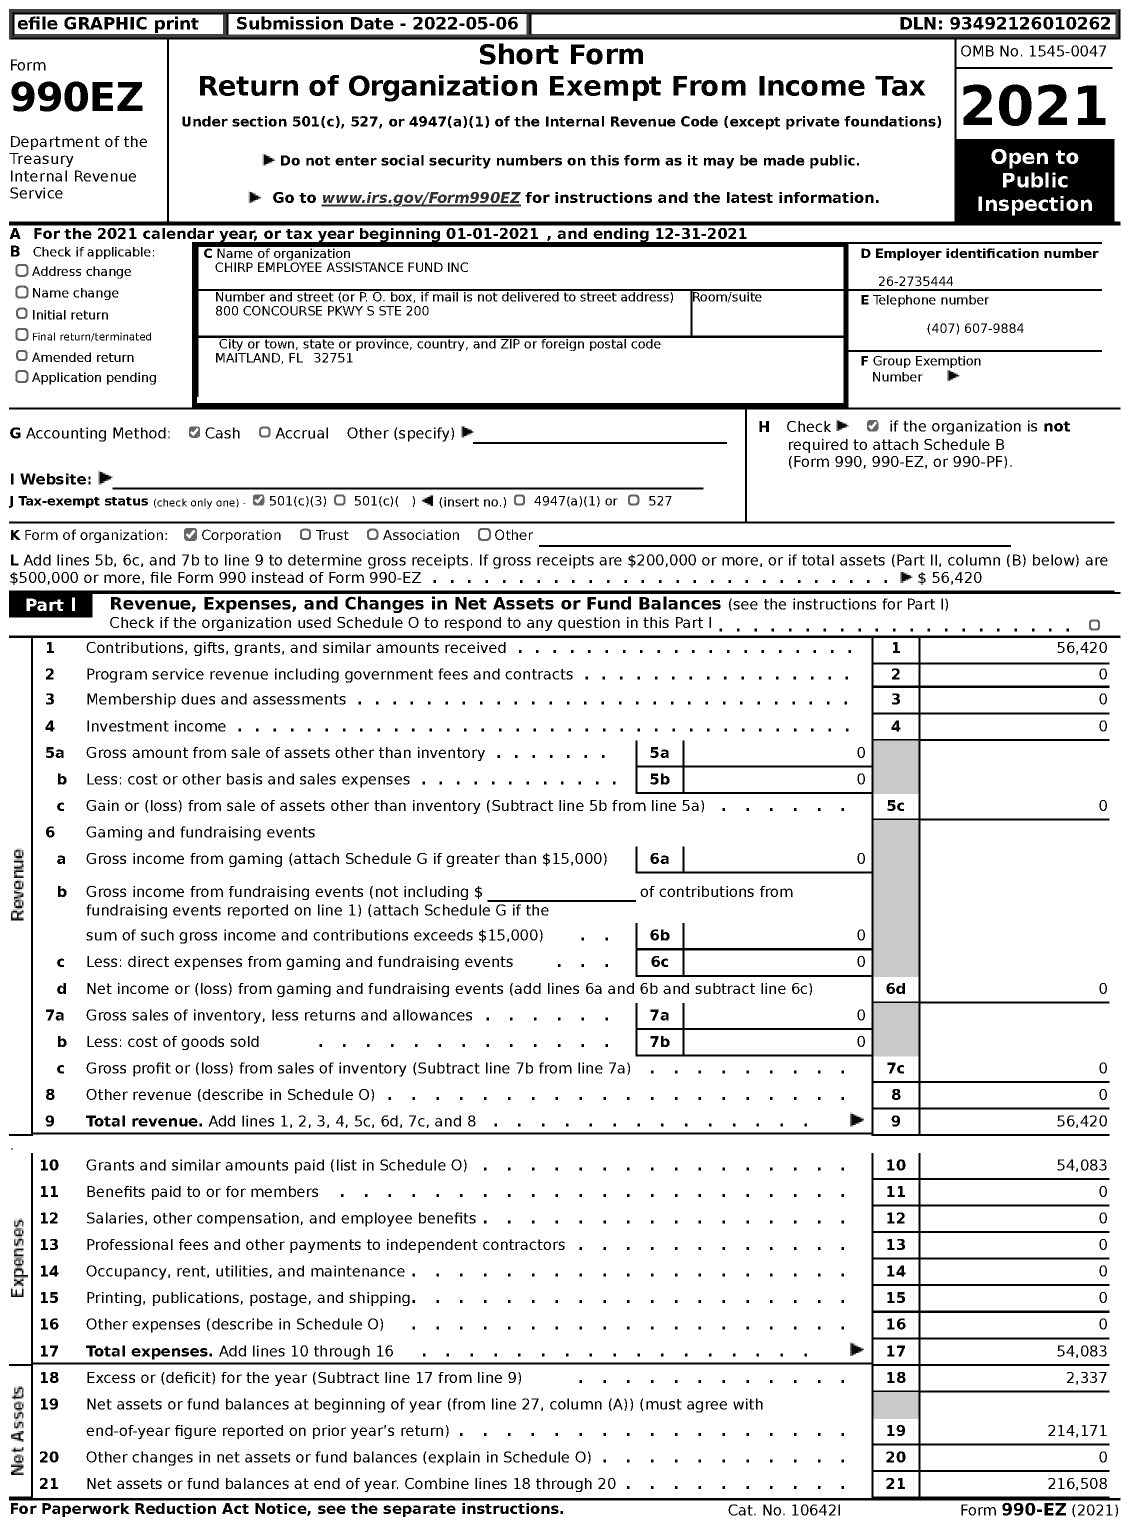 Image of first page of 2021 Form 990EZ for Chirp Employee Assistance Fund